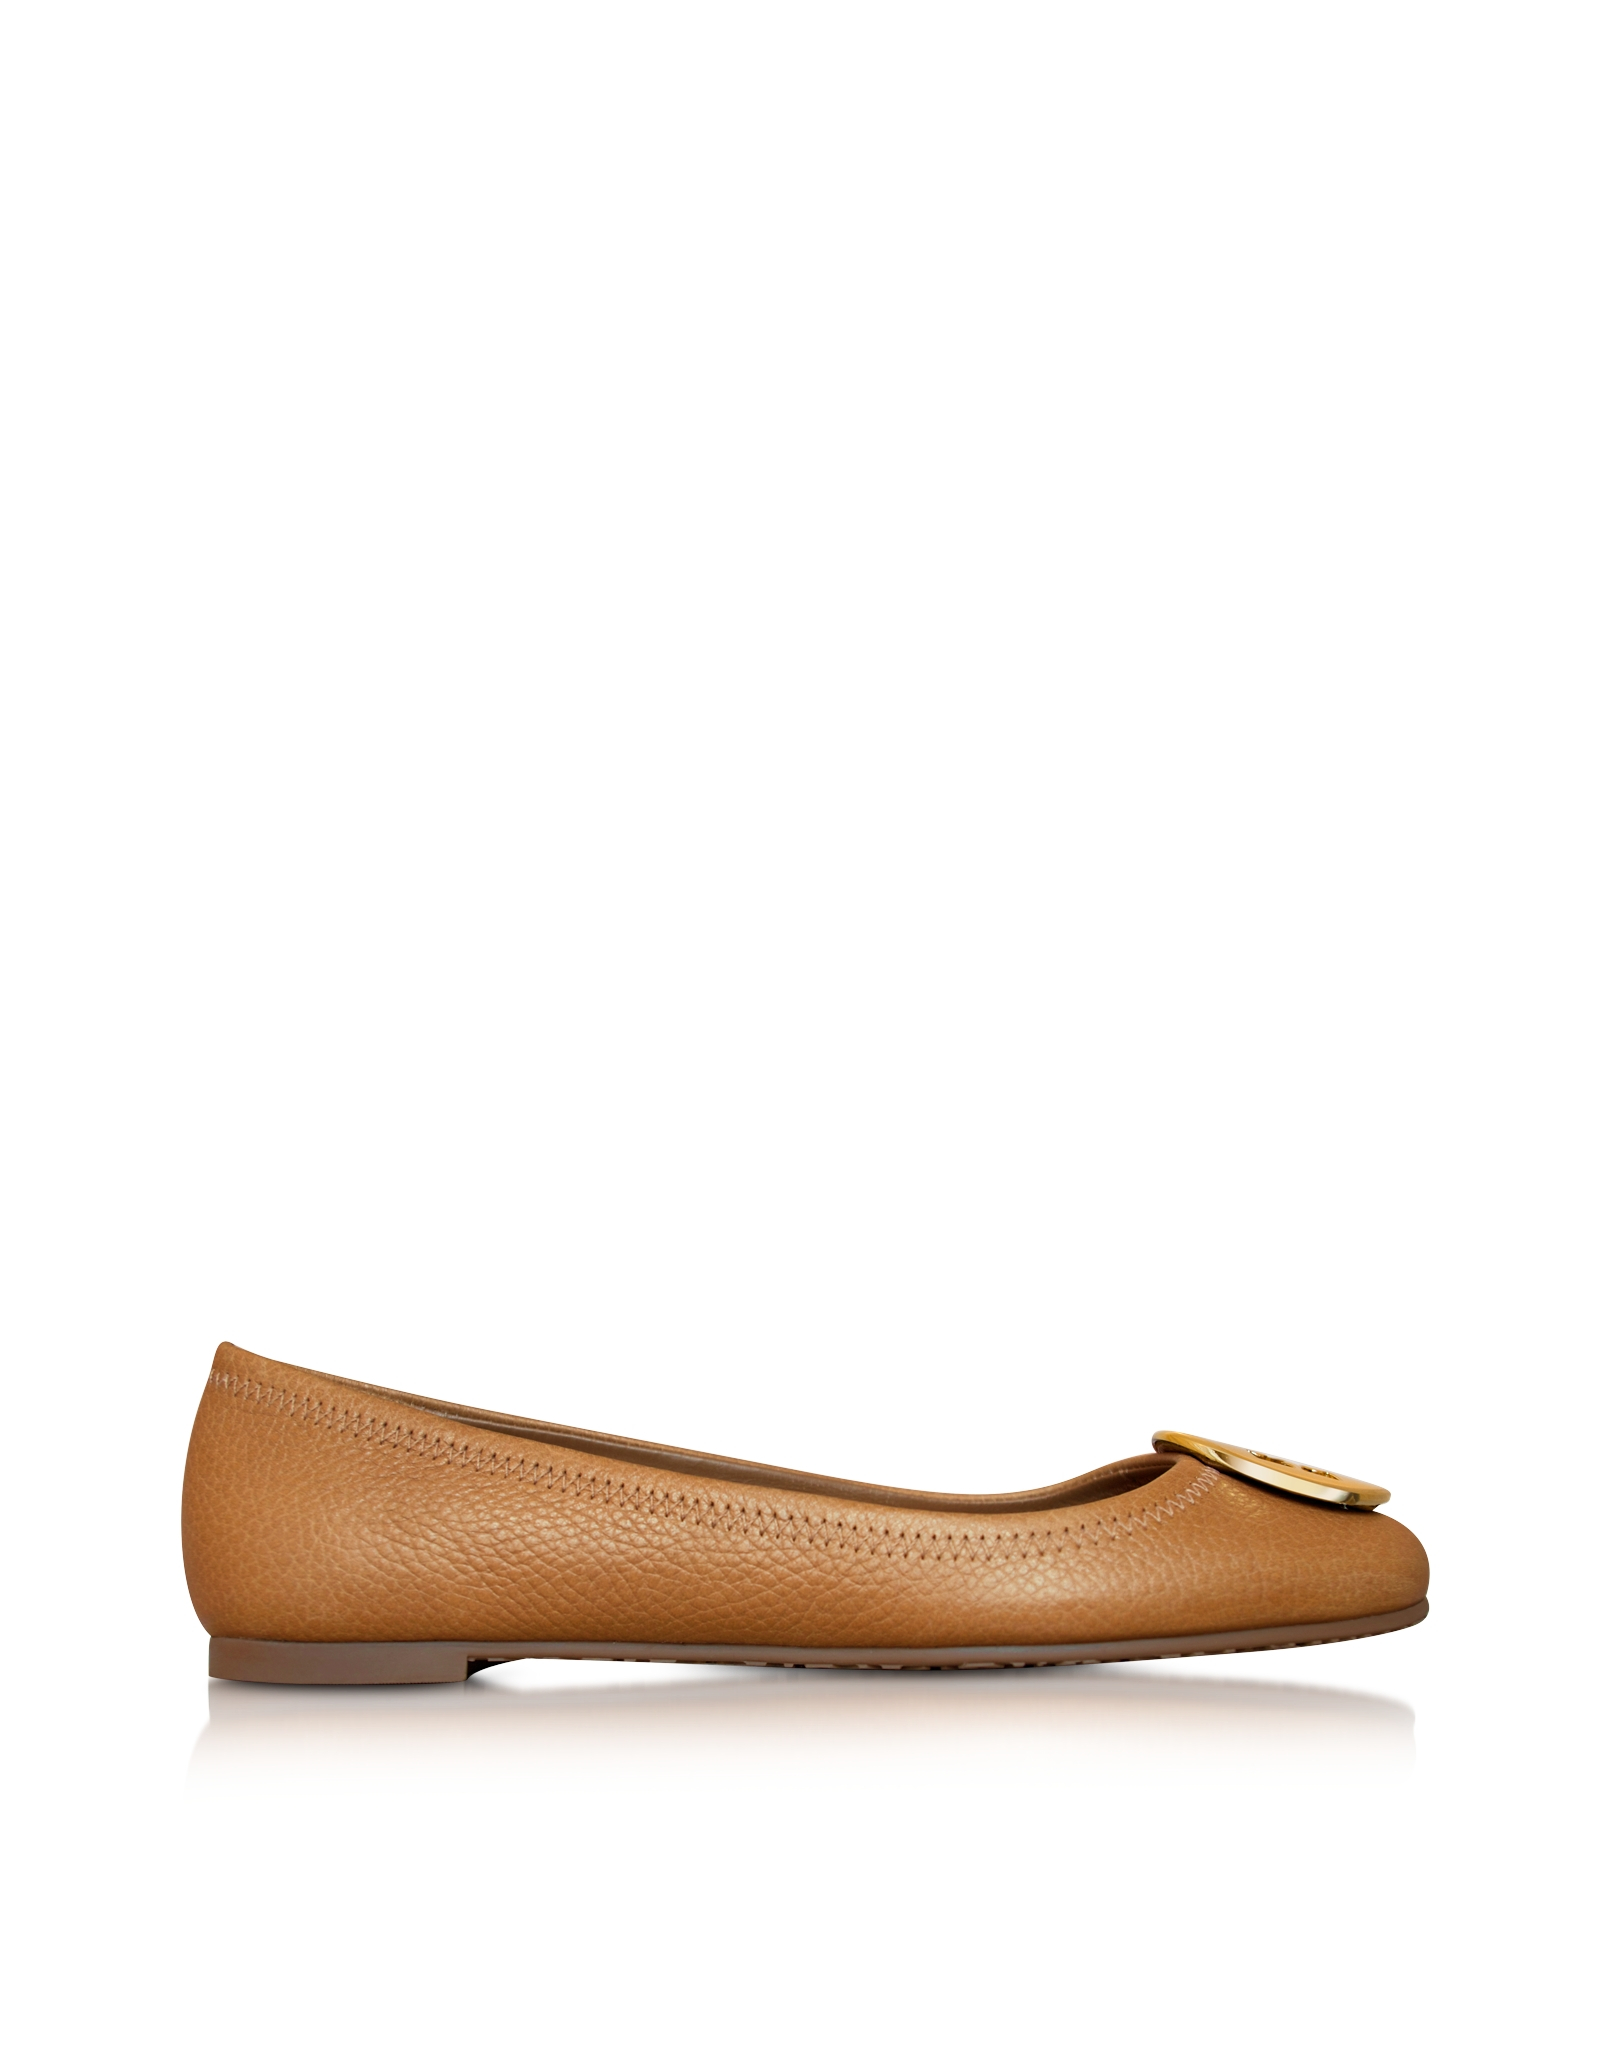 Tory Burch Reva Tumbled Leather Ballet Flat In Brown Lyst